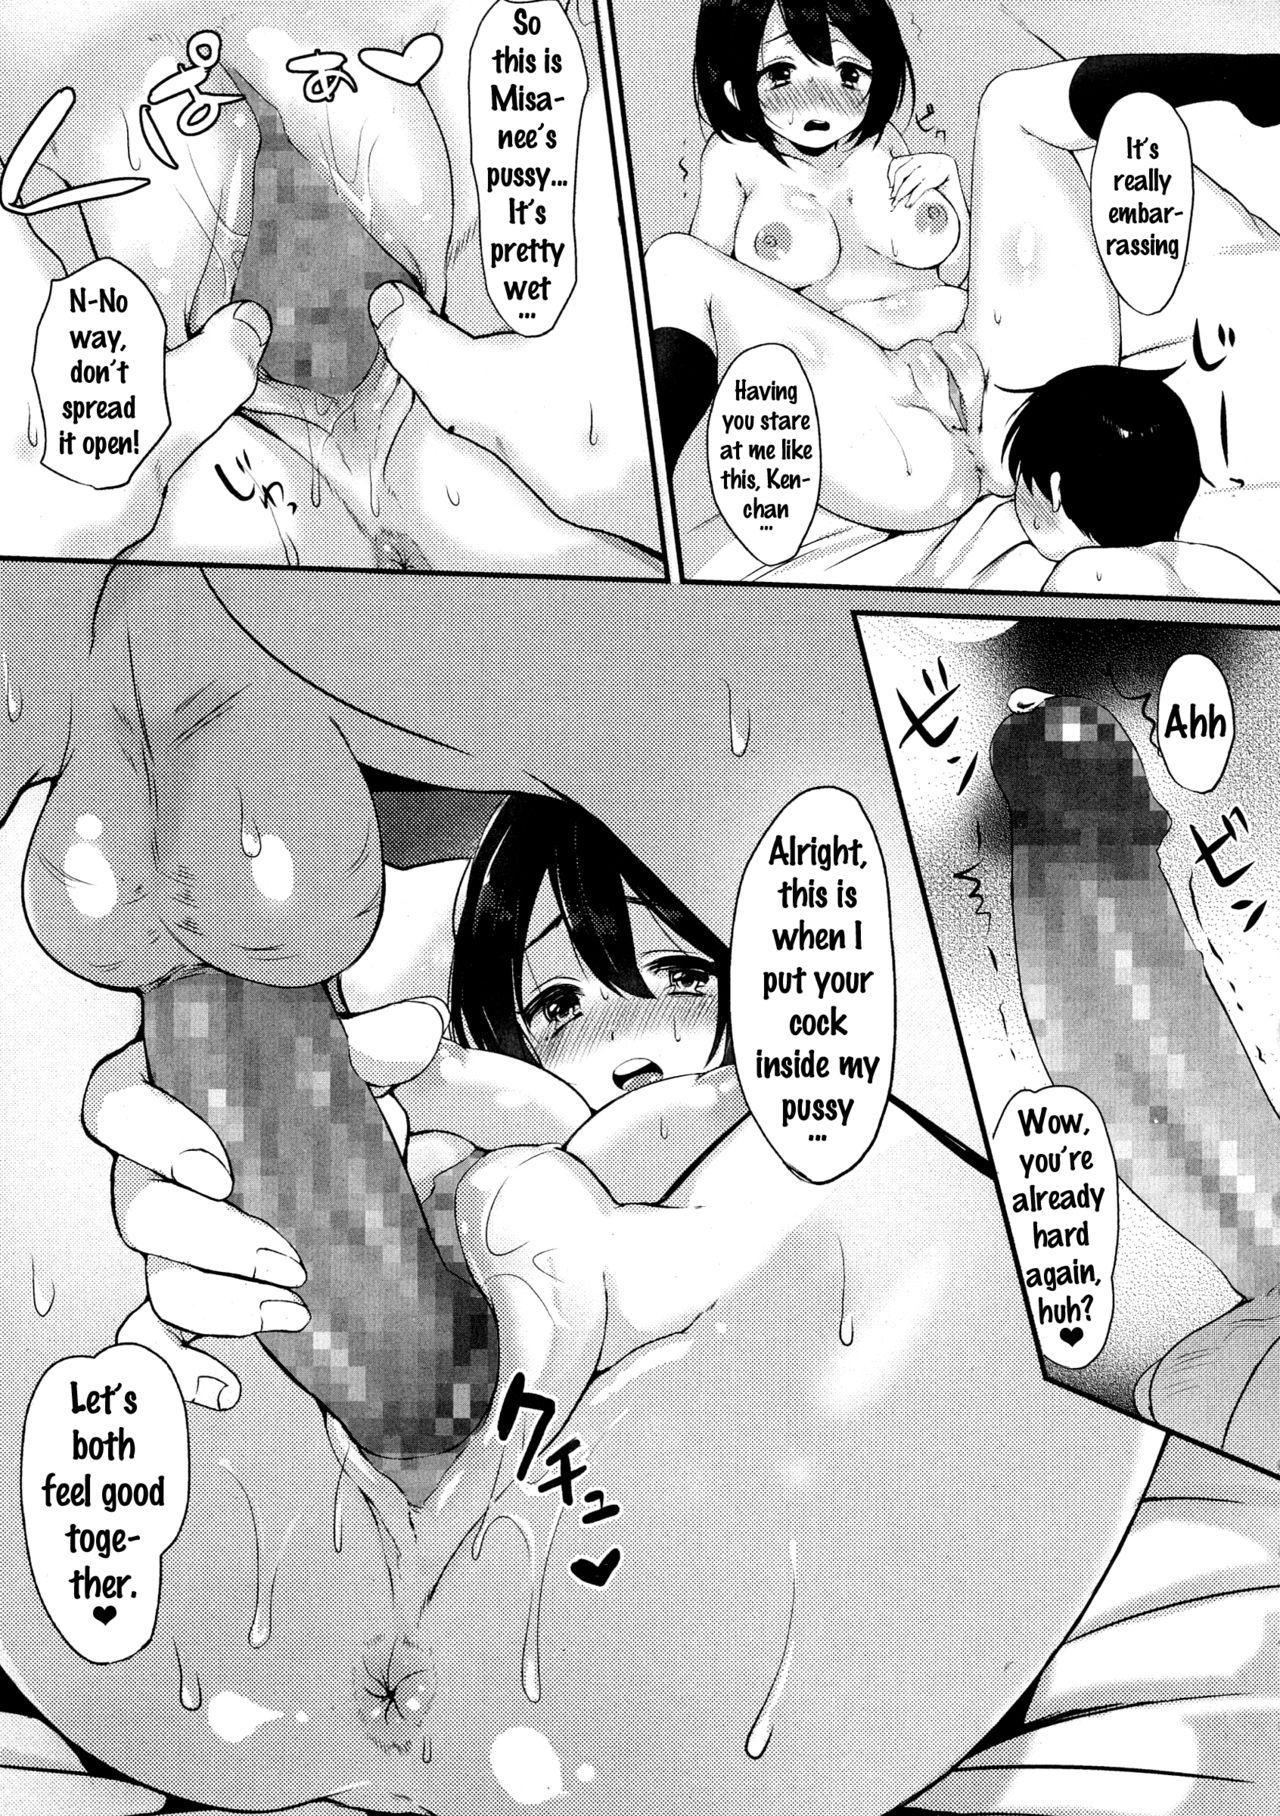 [Paragasu] Onee-san to Issho | Together with Onee-chan (COMIC JSCK Vol. 6) [English] {doujins.com} 8